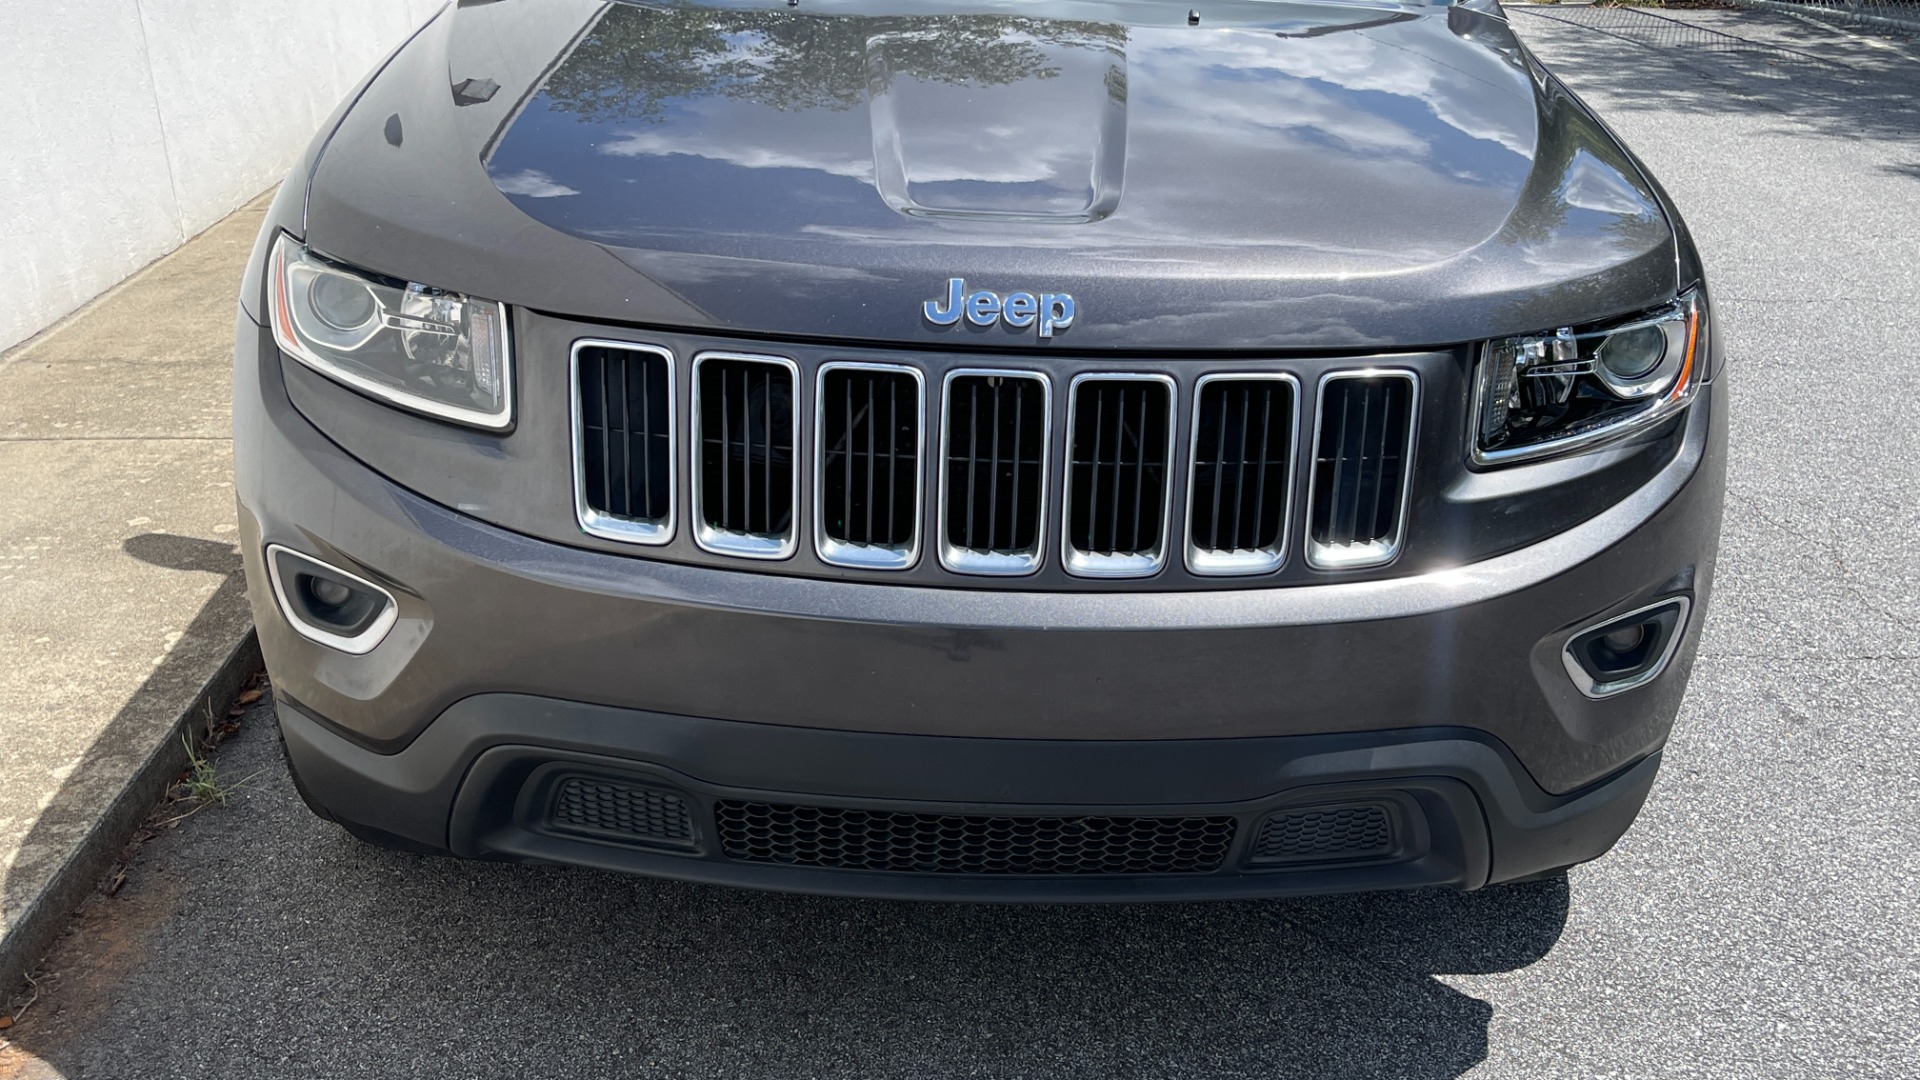 Used 2014 Jeep Grand Cherokee Laredo for sale Sold at Formula Imports in Charlotte NC 28227 8